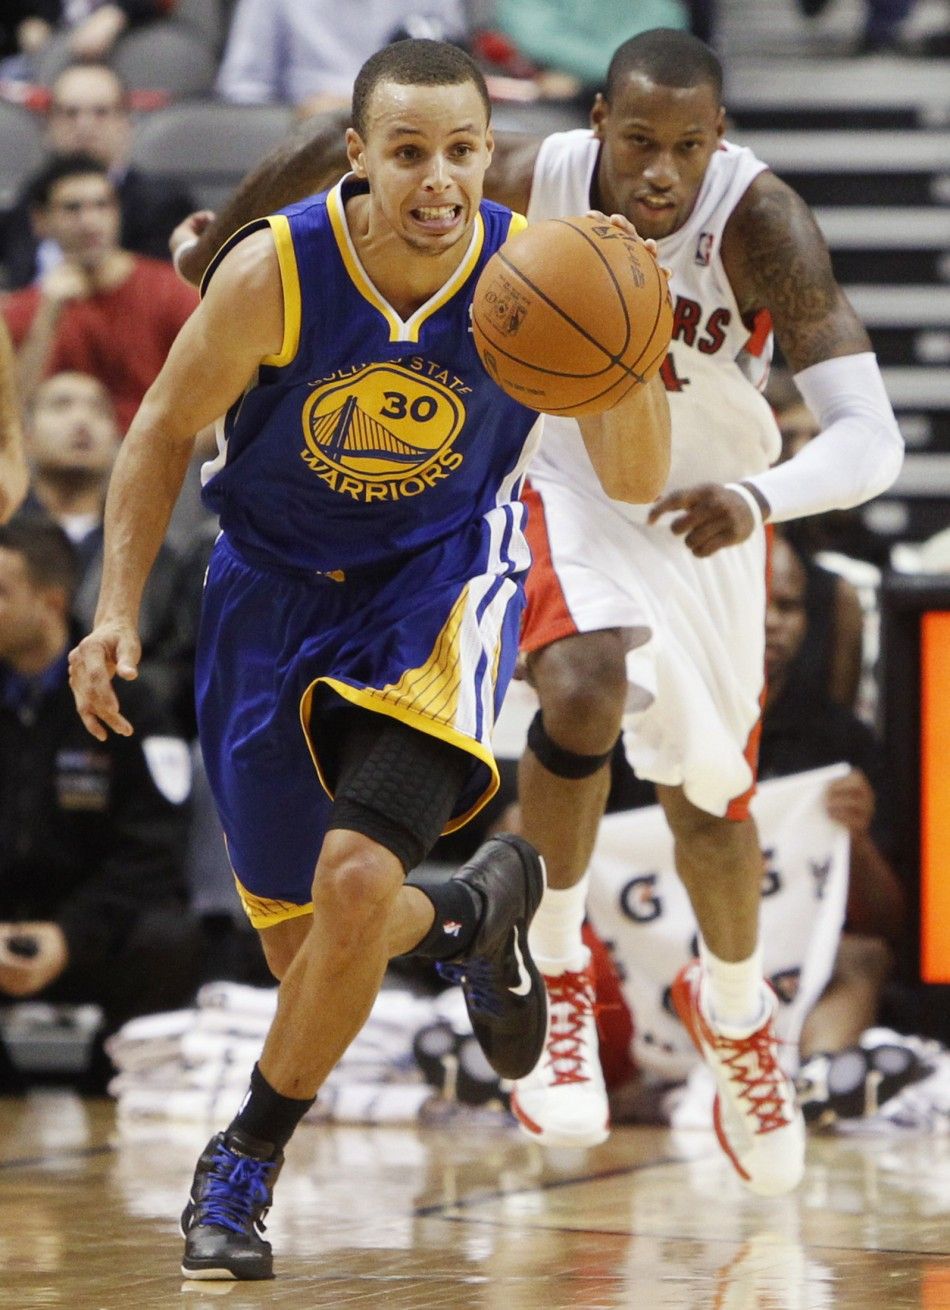 5. Stephen Curry